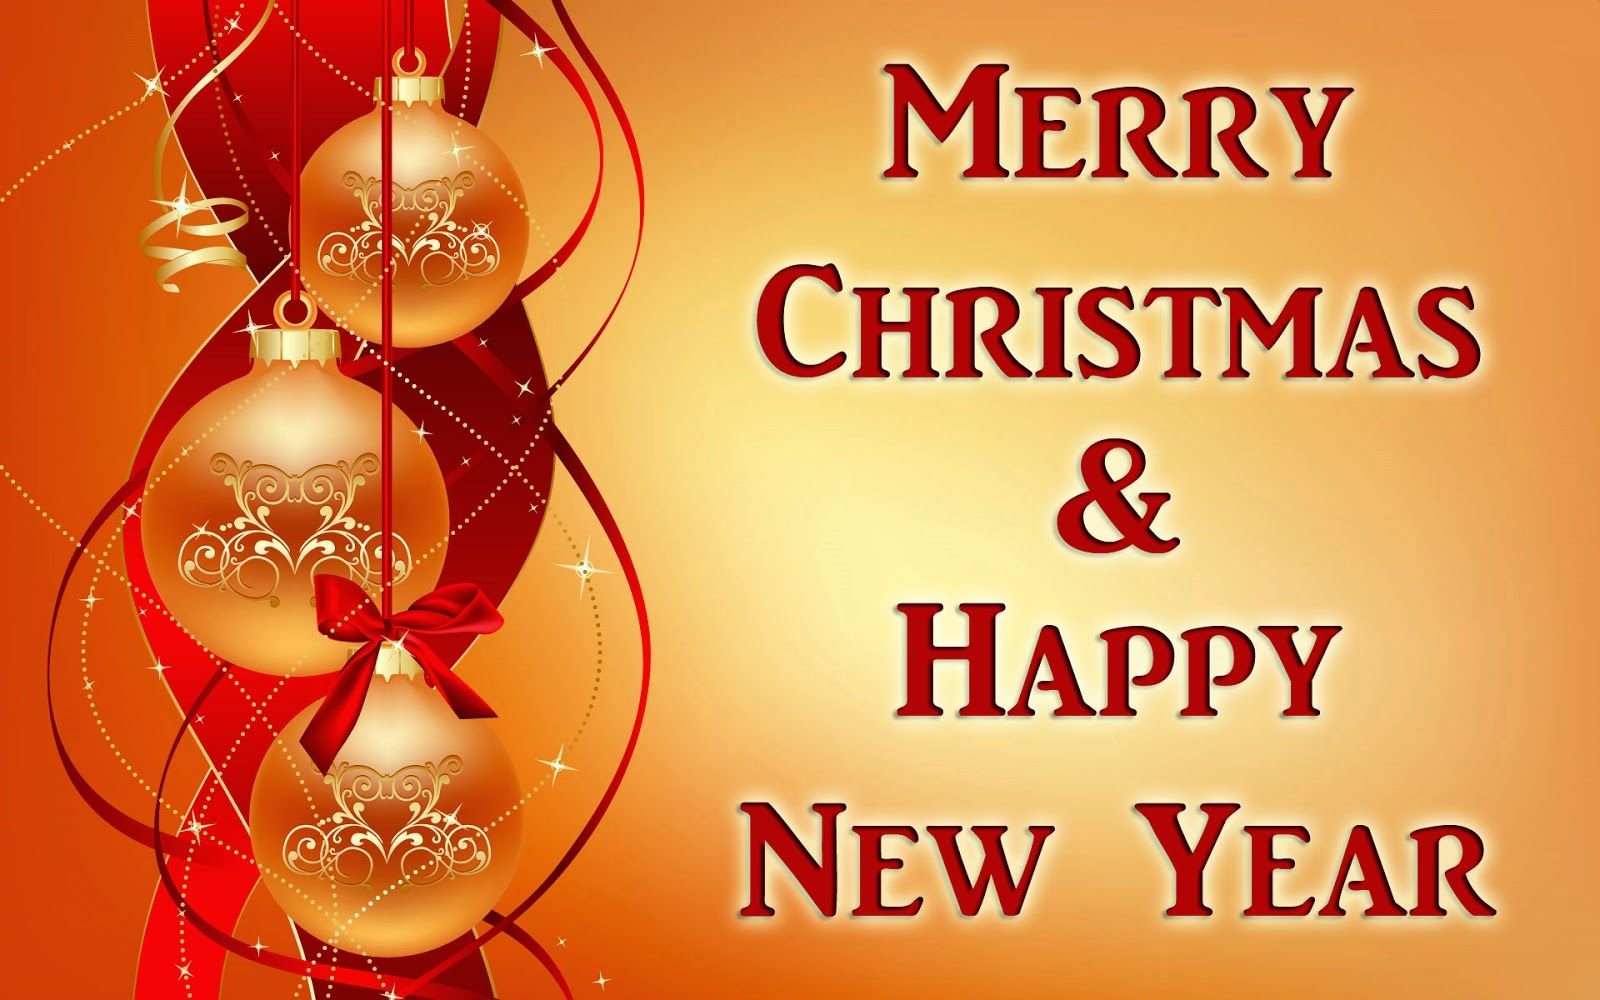 Merry Christmas. Merry Christmas and New year. Happy New year and Christmas. Christmas and New year Wishes. Happy christmas be